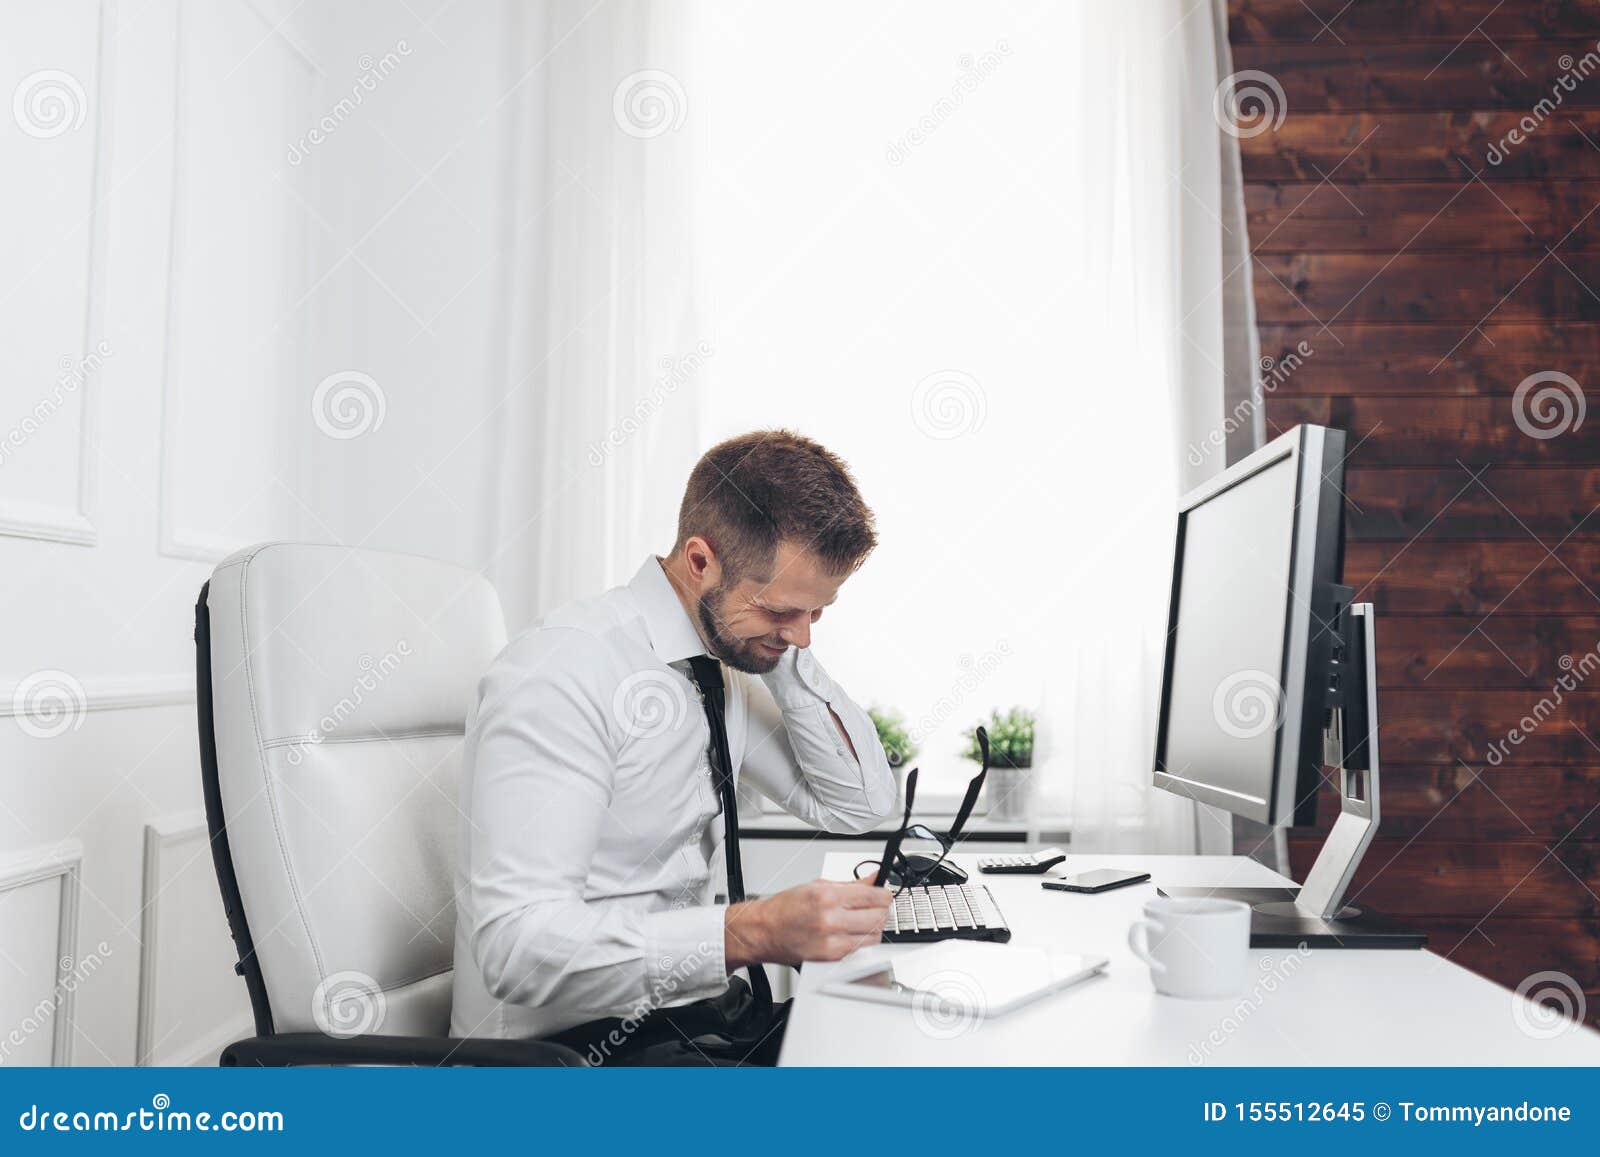 Office Worker With Pain From Sitting At Desk All Day Stock Image